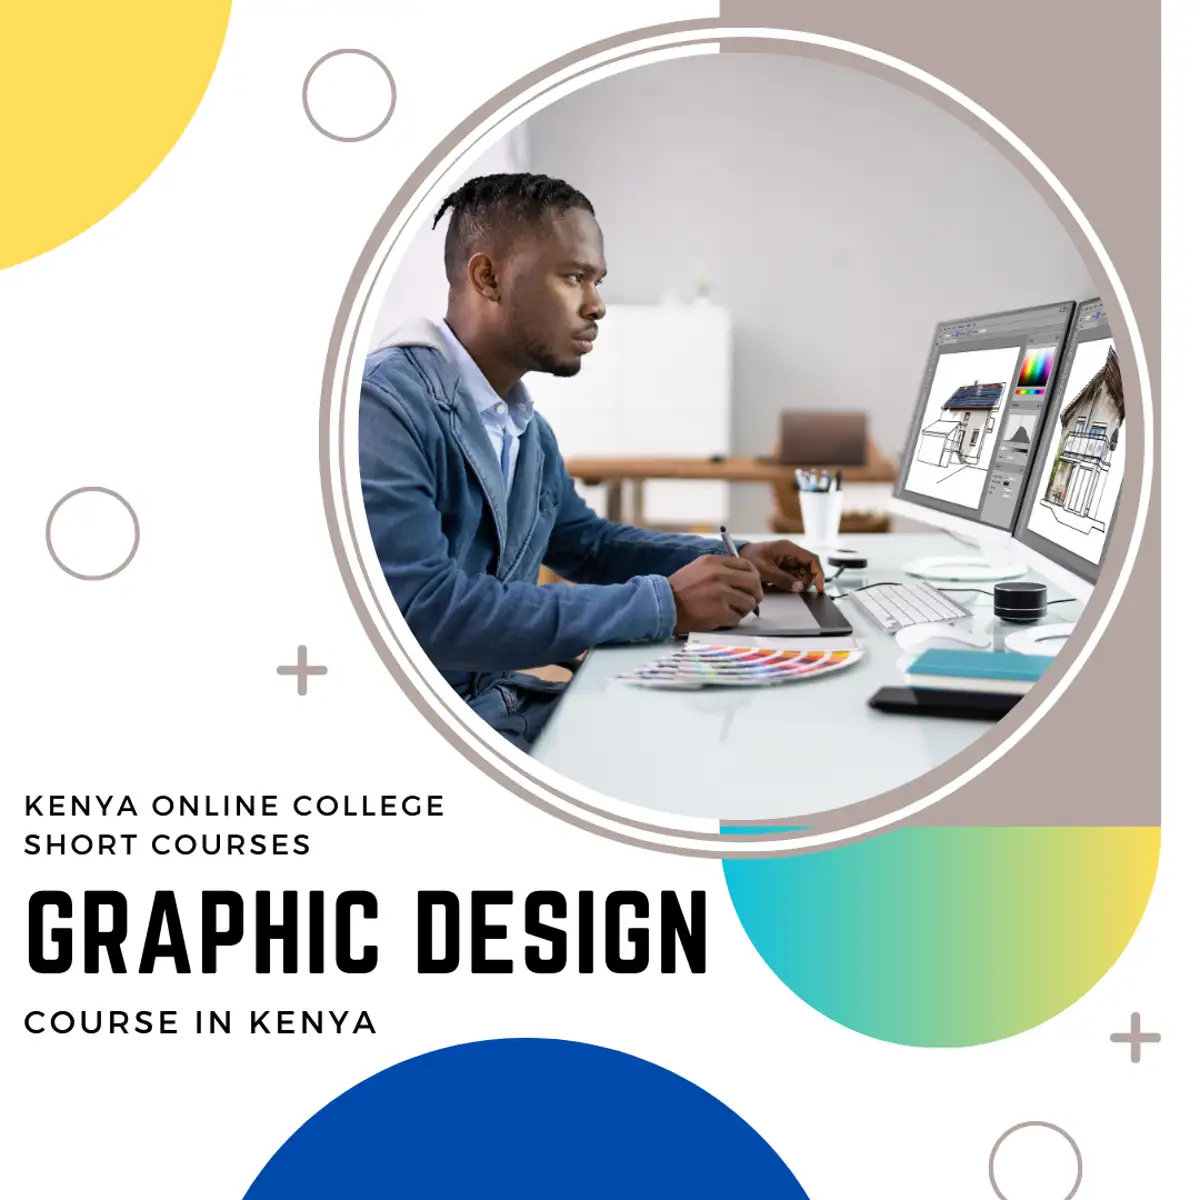 Graphic Design course in Kenya